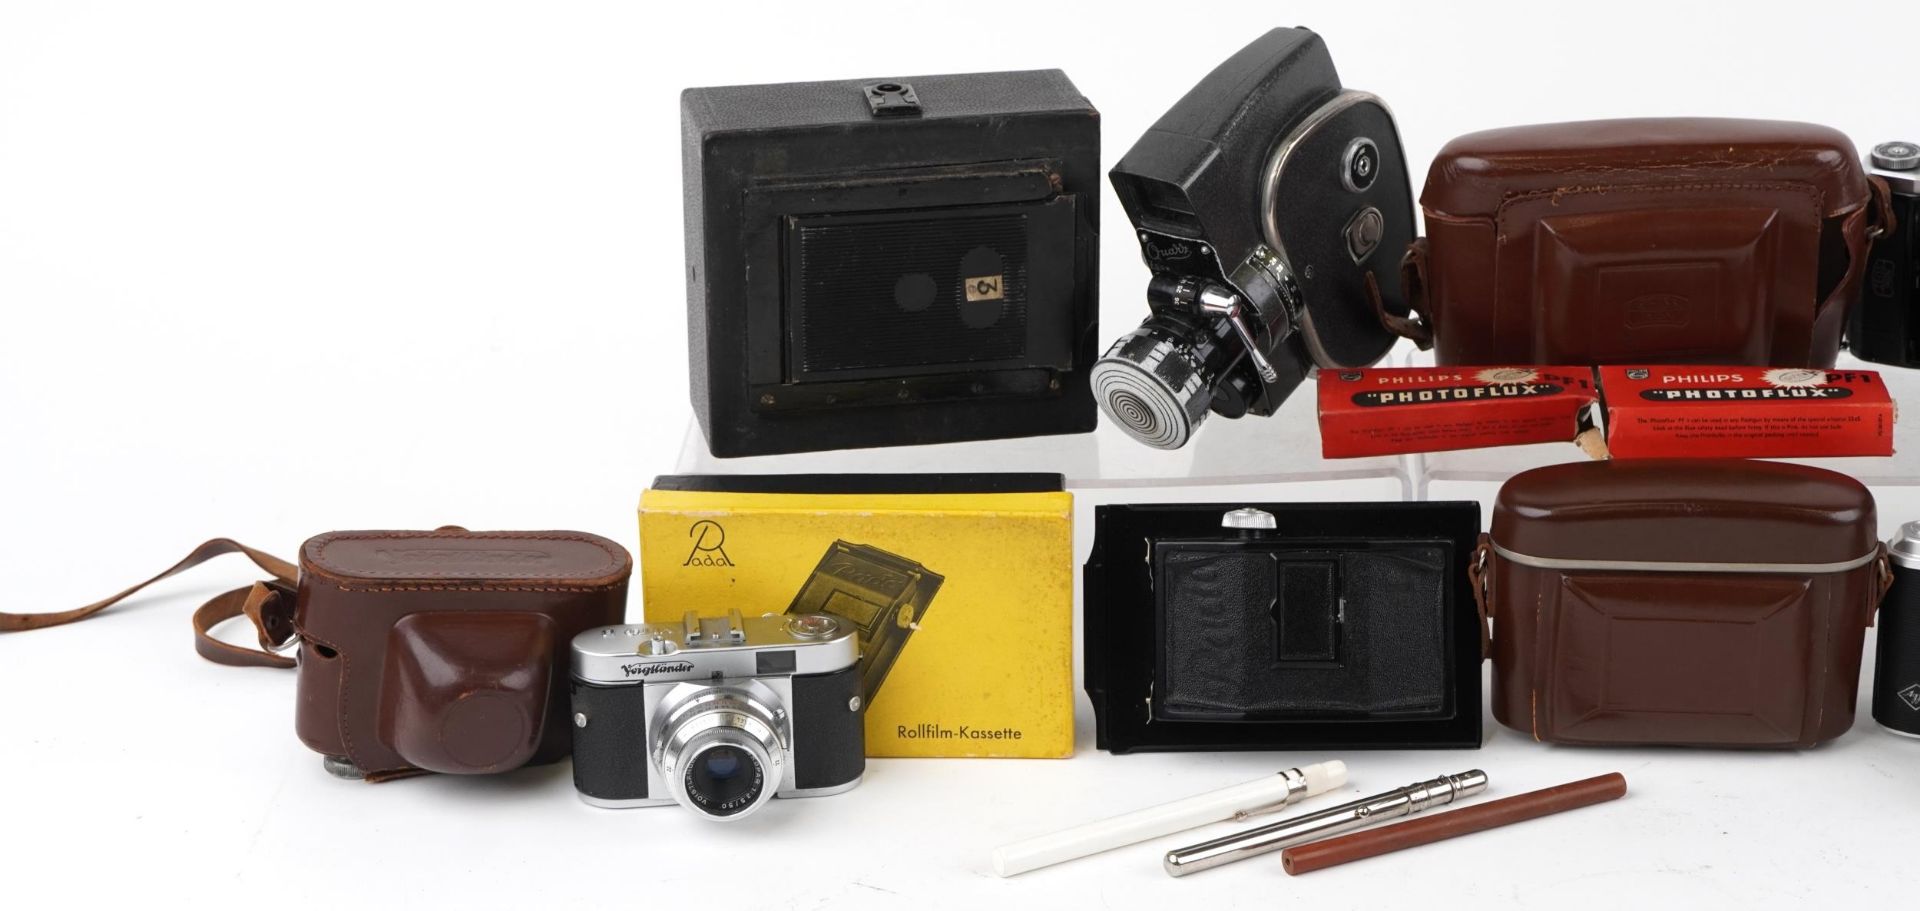 Vintage cameras and accessories including Zeiss Ikon, AGFA Isolette and Voigtlander - Bild 2 aus 3